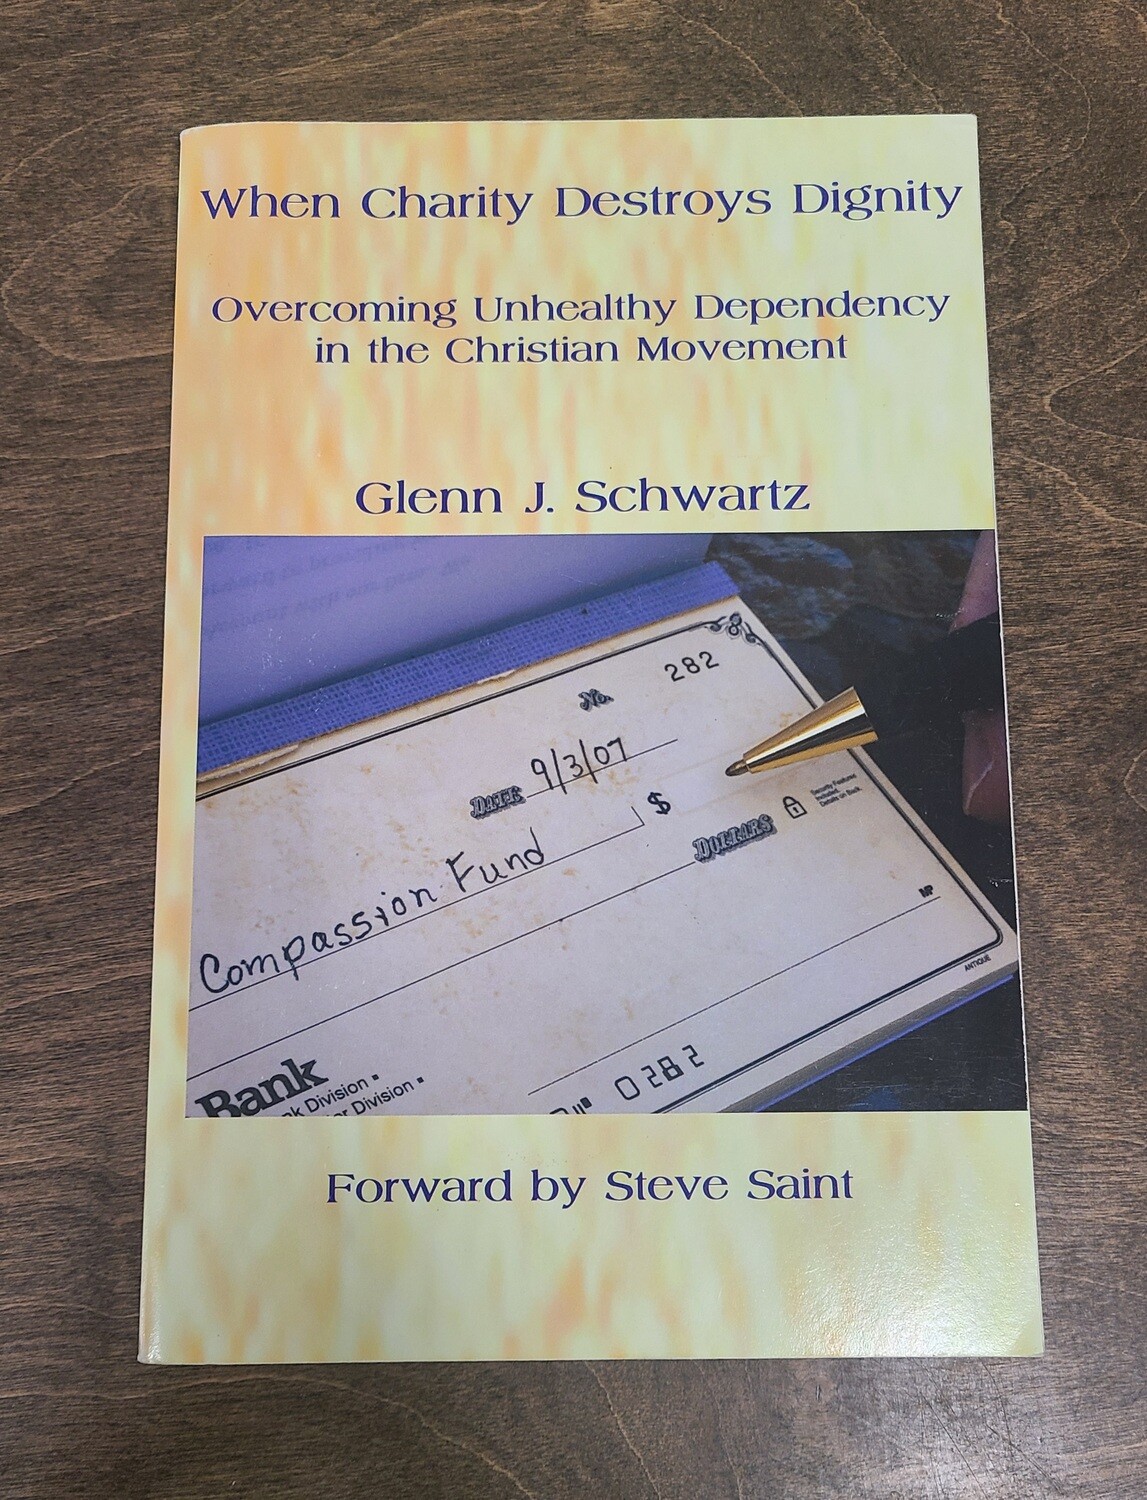 When Charity Destroys Dignity: Overcoming Unhealthy Dependency in the Christian Movement by Glenn J. Schwartz